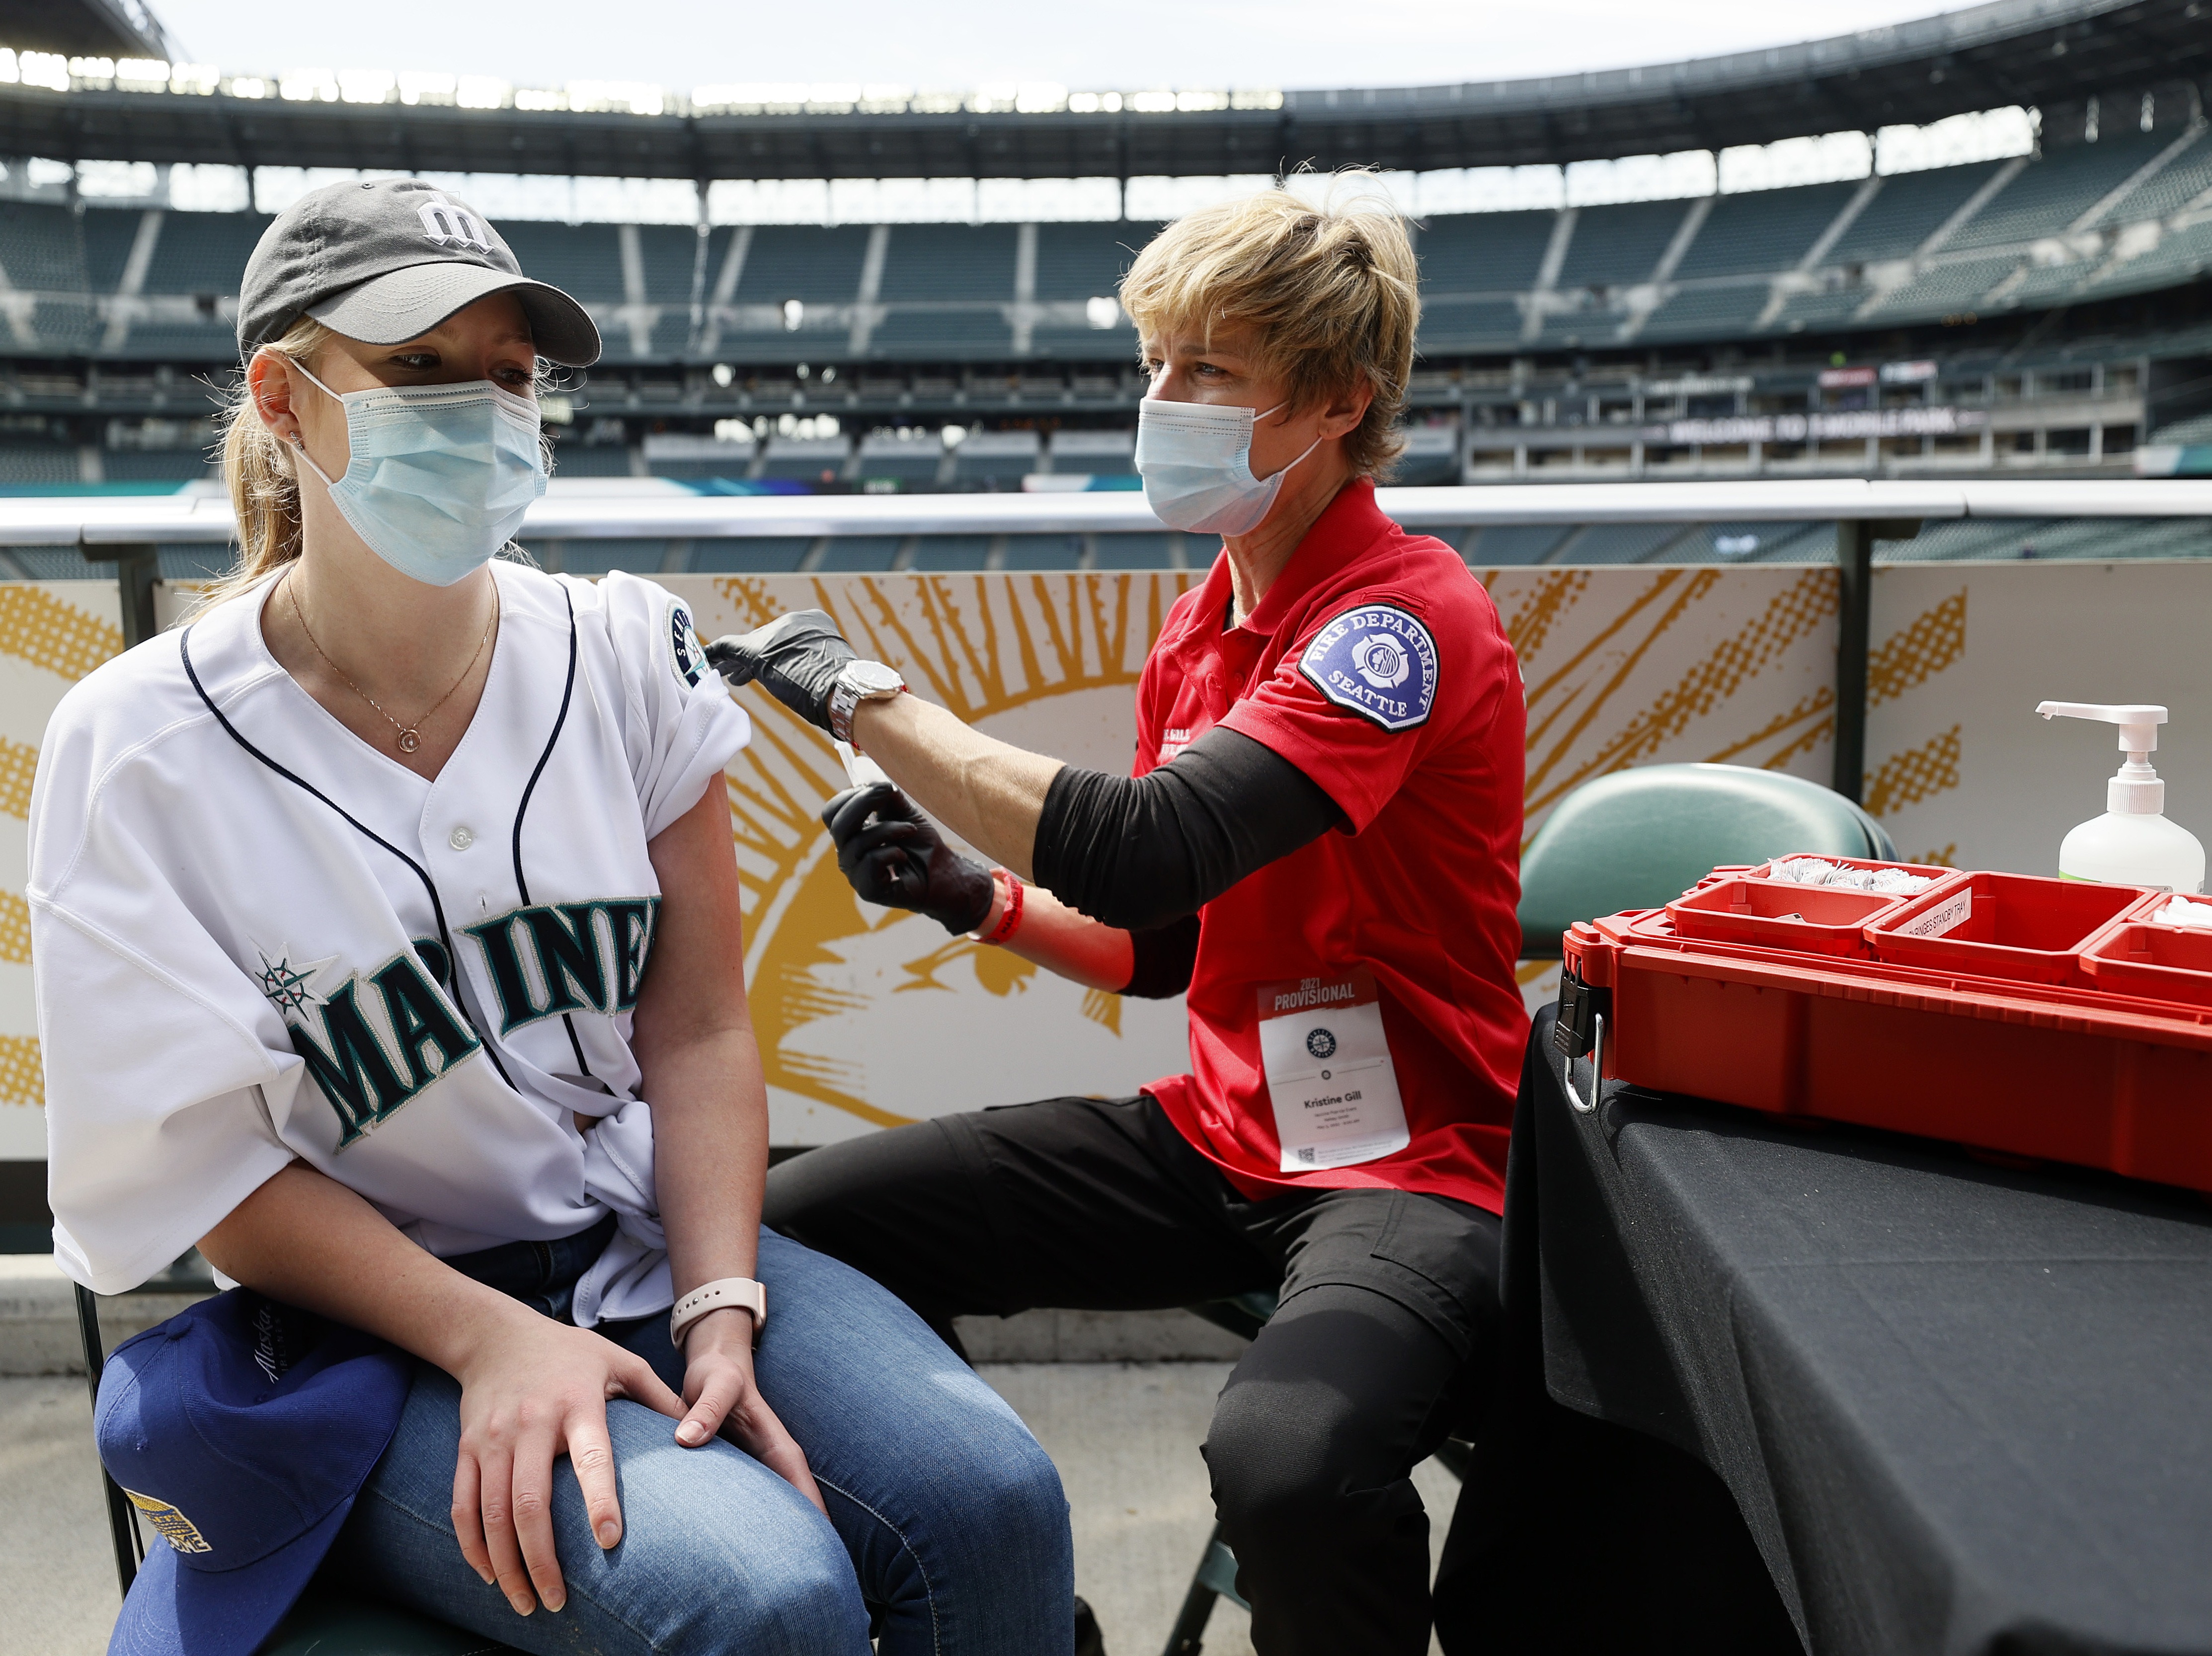 Sydney Porter of Bellevue, Wash., receives her COVID-19 vaccination from Kristine Gill, with the Seattle Fire Department's Mobile Vaccination Teams, before the game between the Seattle Mariners and the Baltimore Orioles at T-Mobile Park on May 5 in Seattle. A late spring COVID-19 surge has filled hospitals in the metro areas around Seattle. CREDIT: Steph Chambers/Getty Images